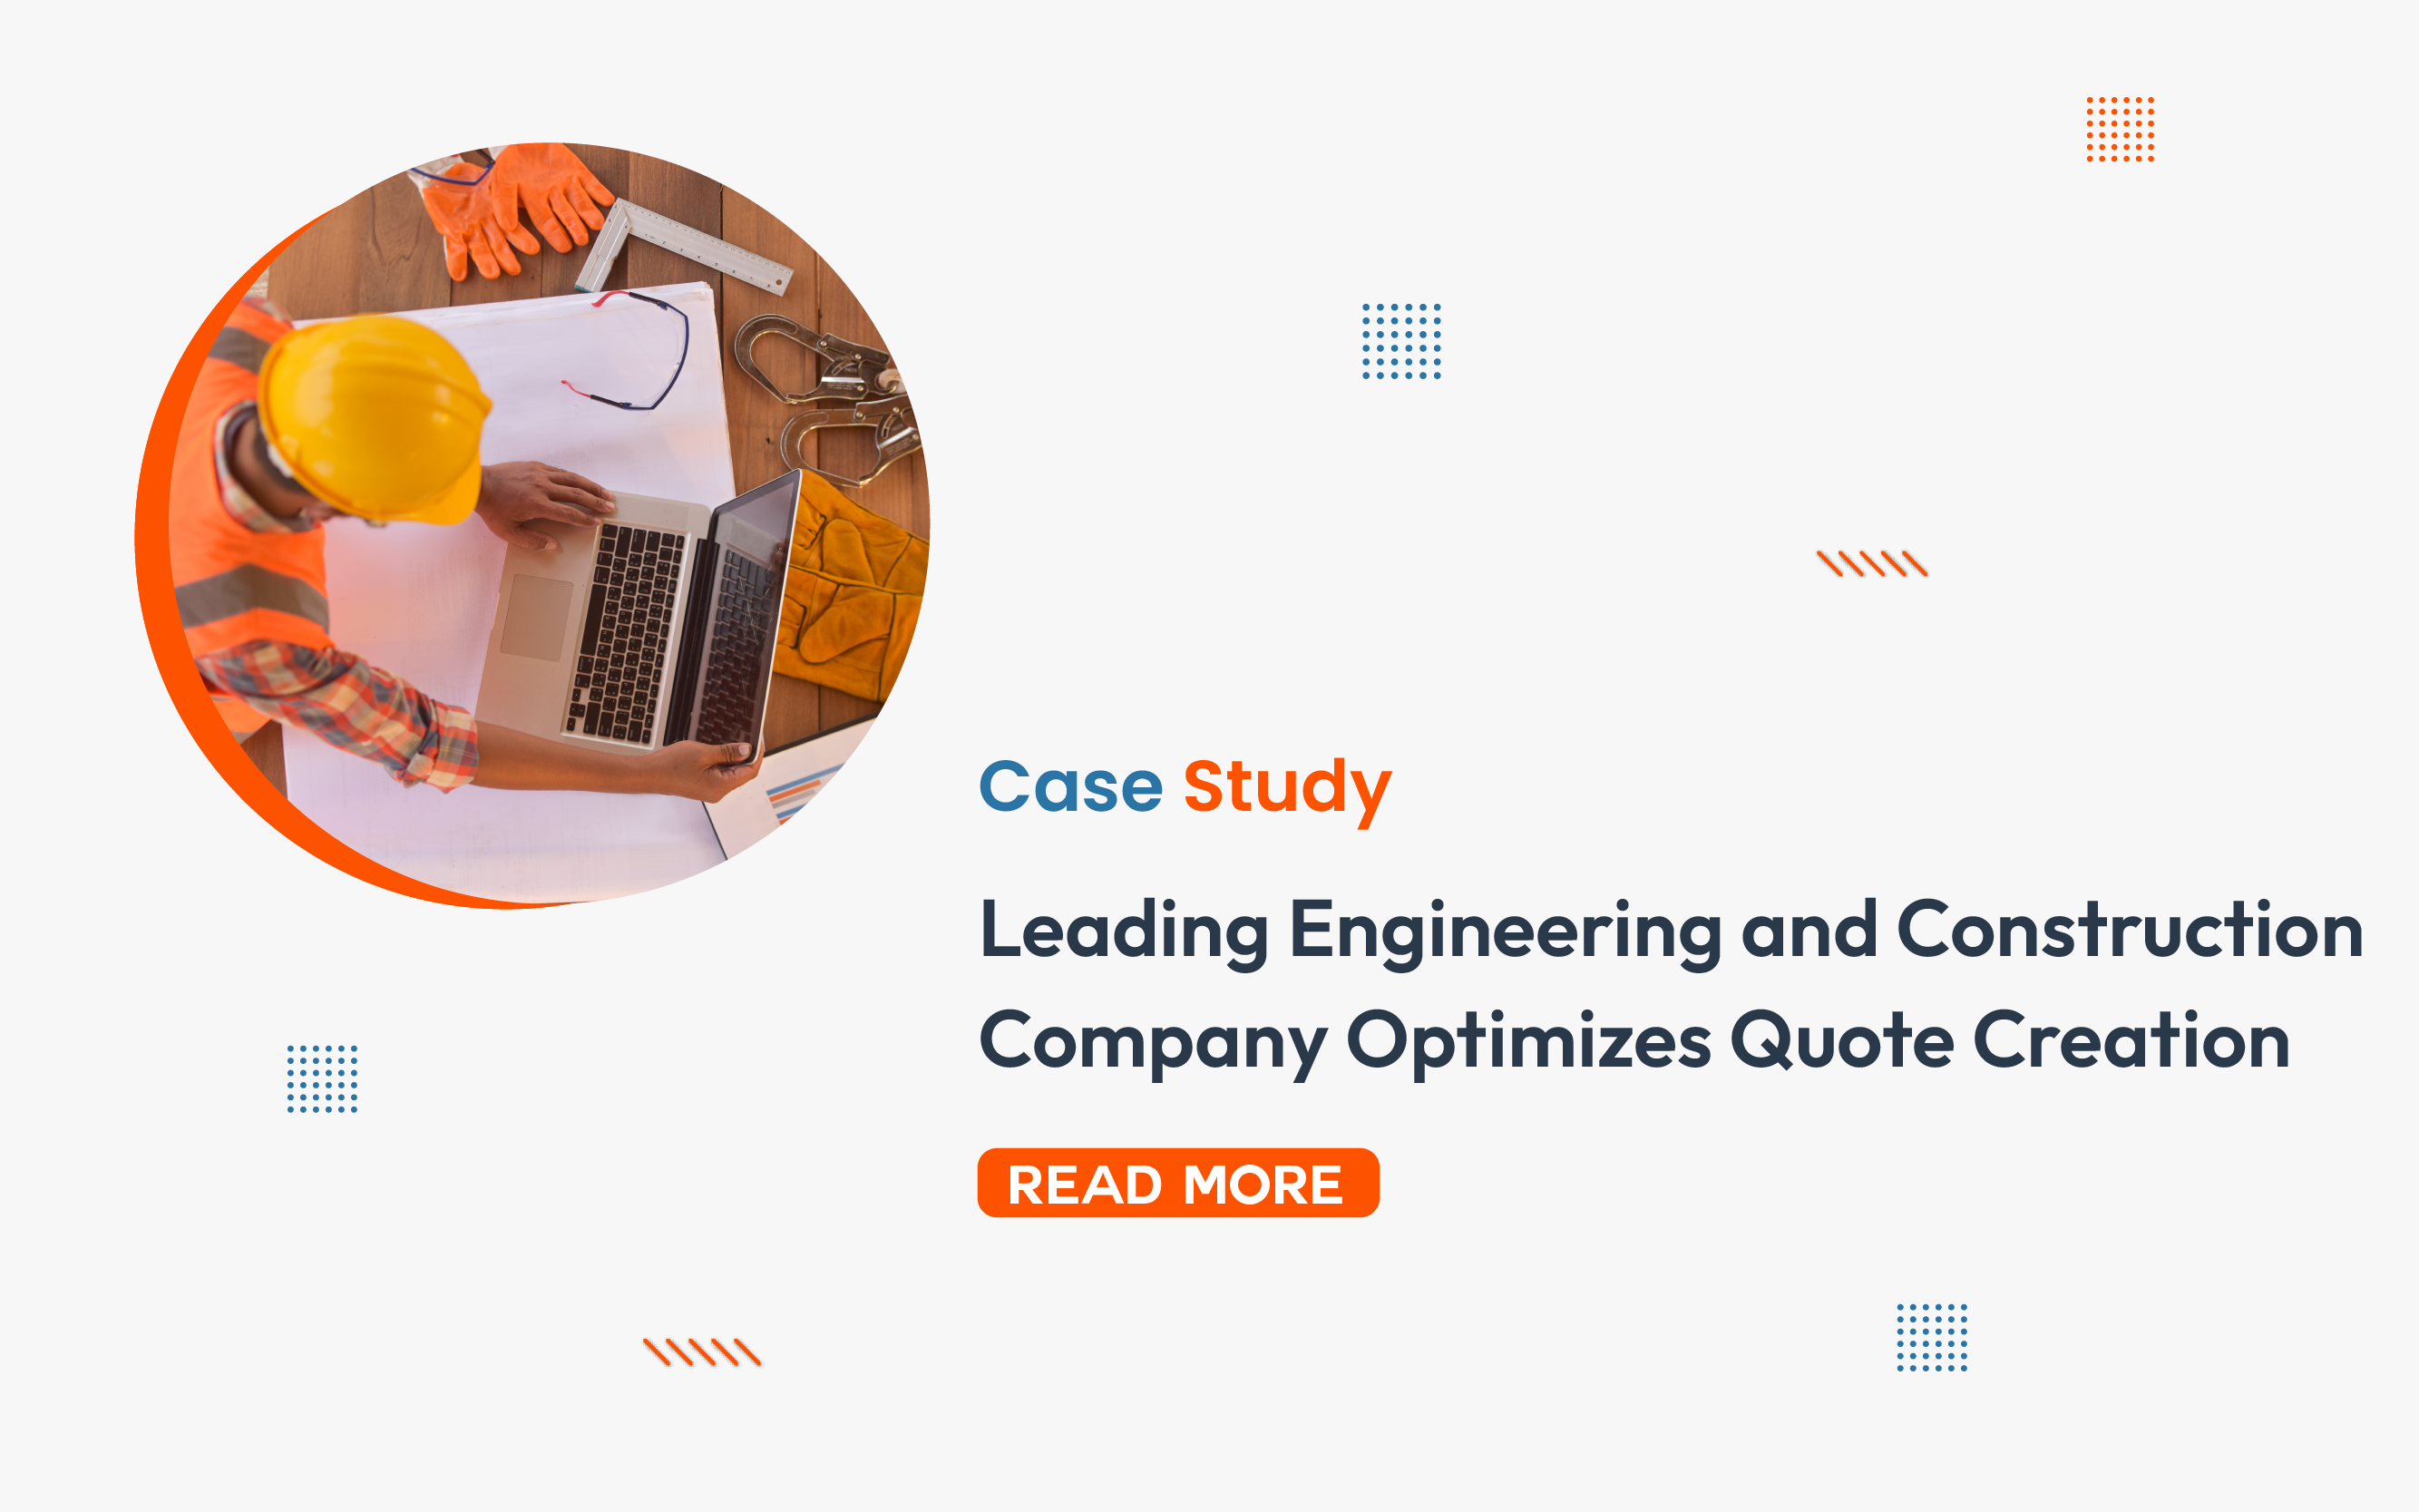 Case Study_Leading Engineering and Construction Company Optimizes Quote Creation